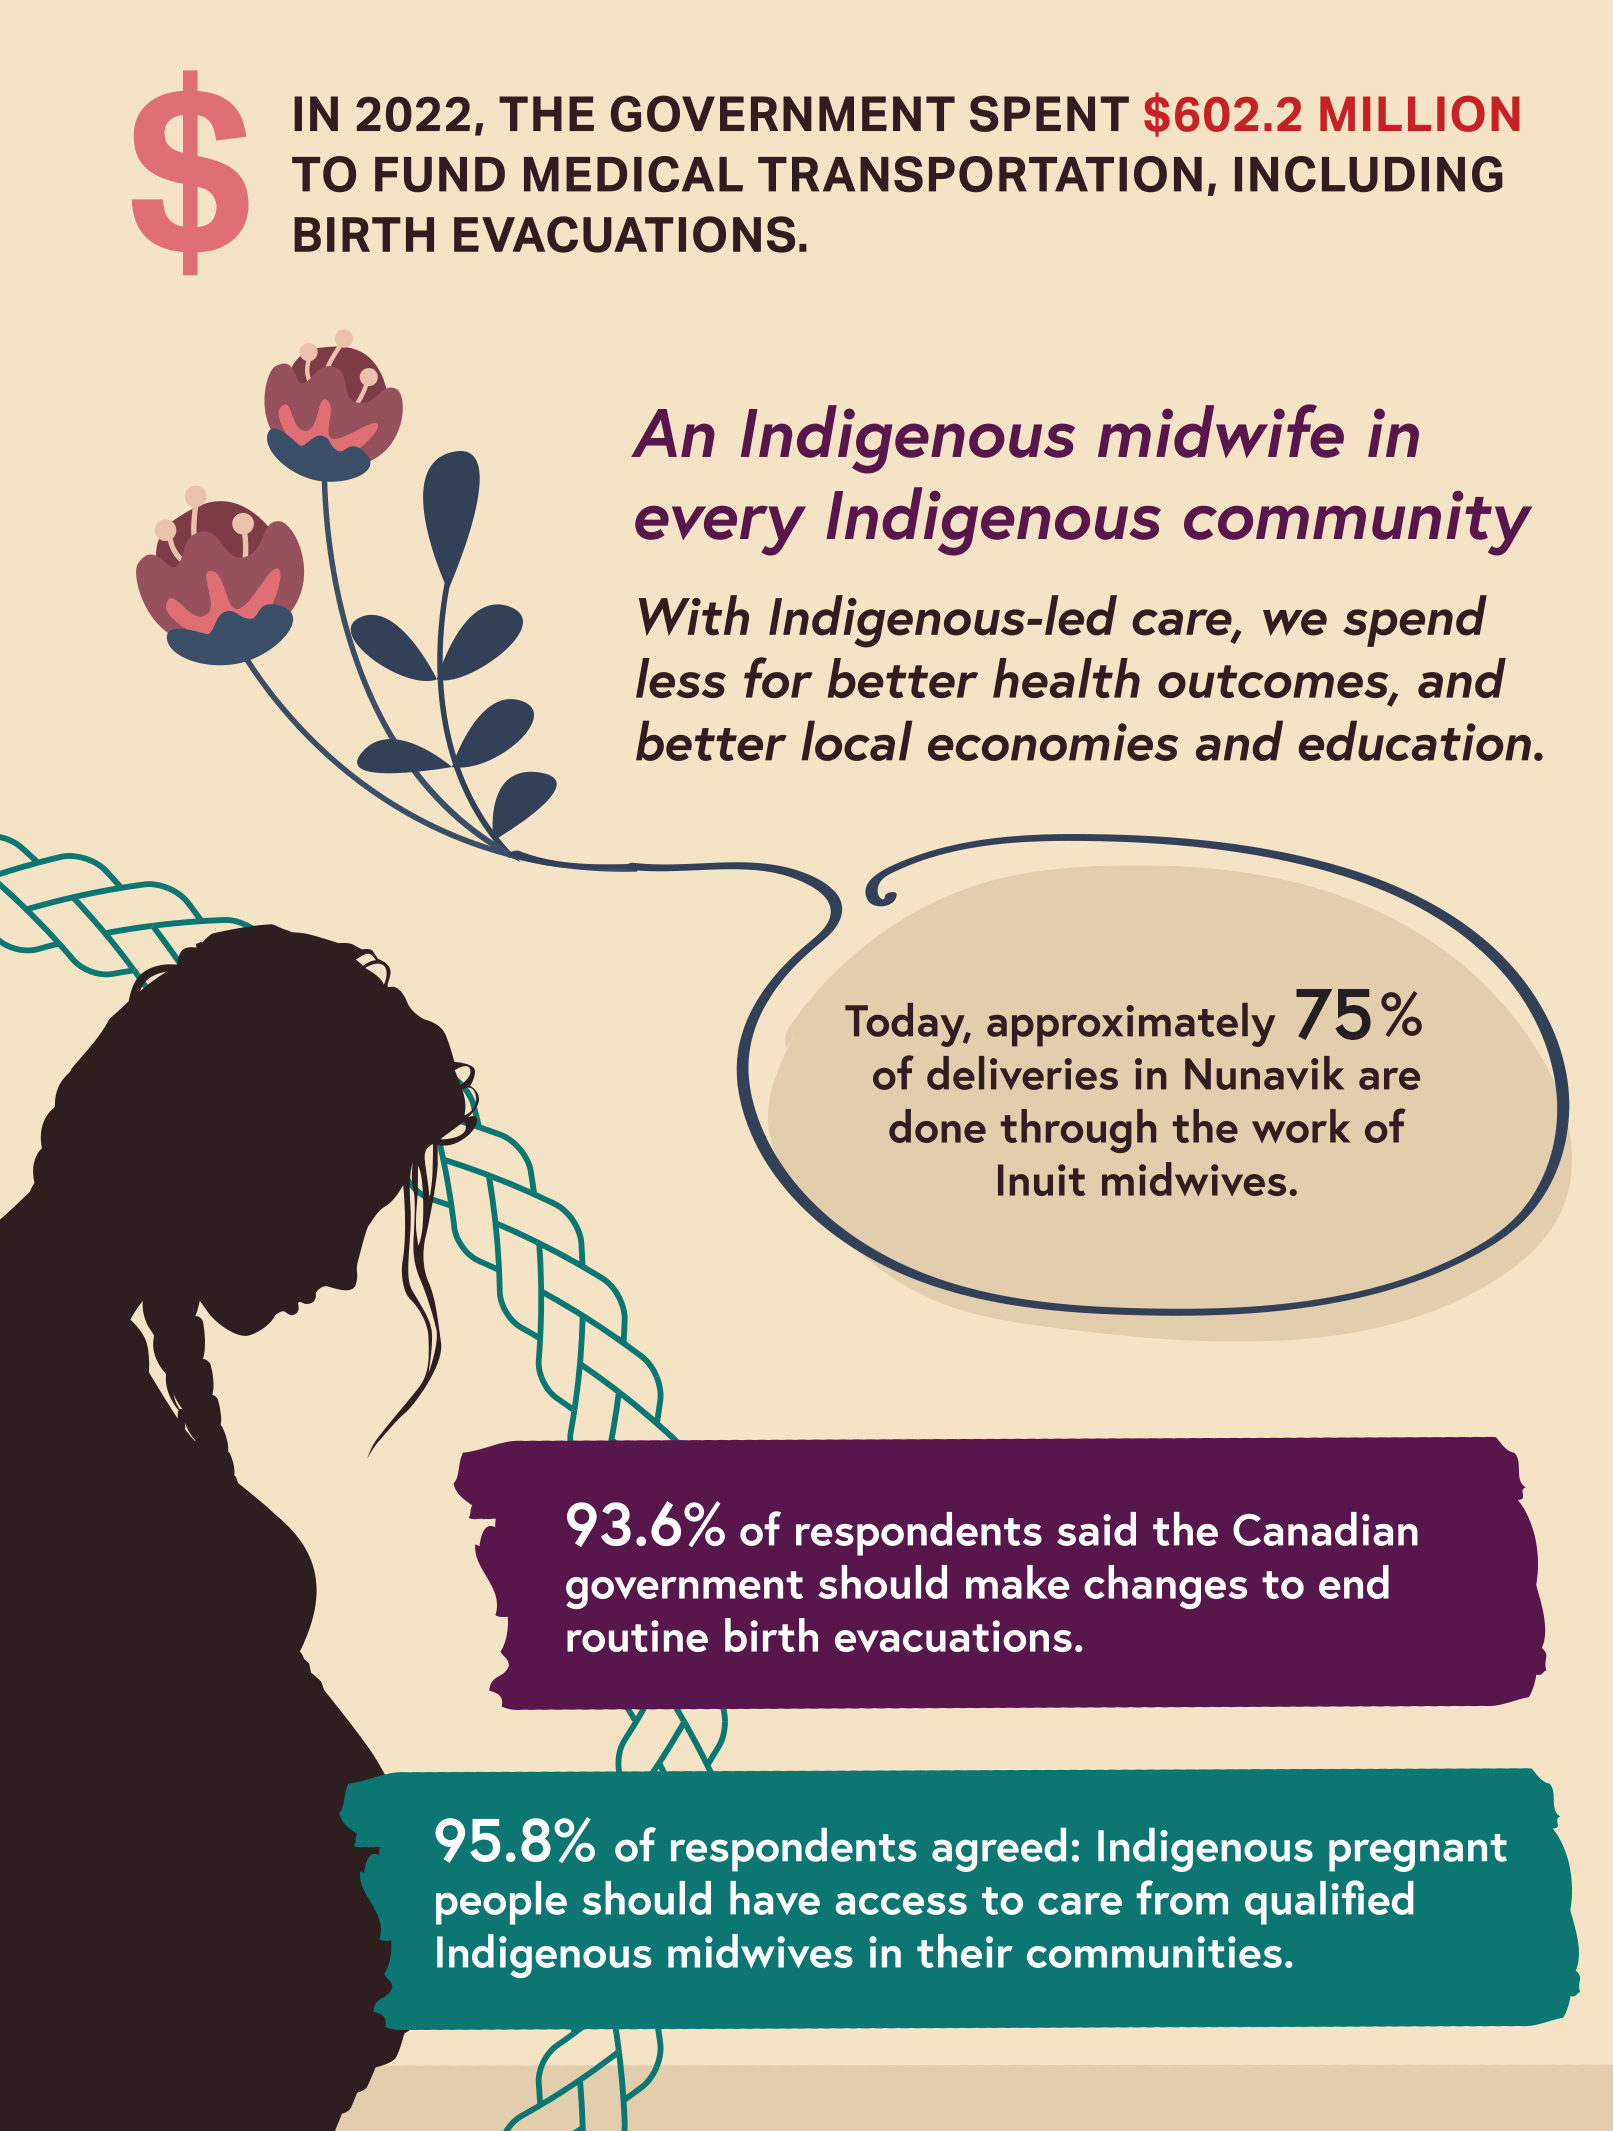 A beige background with purple, teal and red elements. A silhouette of a pregant Indigenous woman looking down. Text highlights statistics and results from the national poll: In 2022, the government spent $602.2 million to fund medical transportation, including birth evacuations. An Indigenous midwife in every Indigenous community. With Indigenous-led care, we spend less for better health outcomes, and better local economies and education. Today, approximately 75% of deliveries in Nunavik are done through the work of Inuit midwives. 93.6% of respondents said the Canadian government should make changes to end routine birth evacuations. 95% of respondents agreed: Indigenous pregnant people should have access to care from qualified Indigenous midwives in their communities.